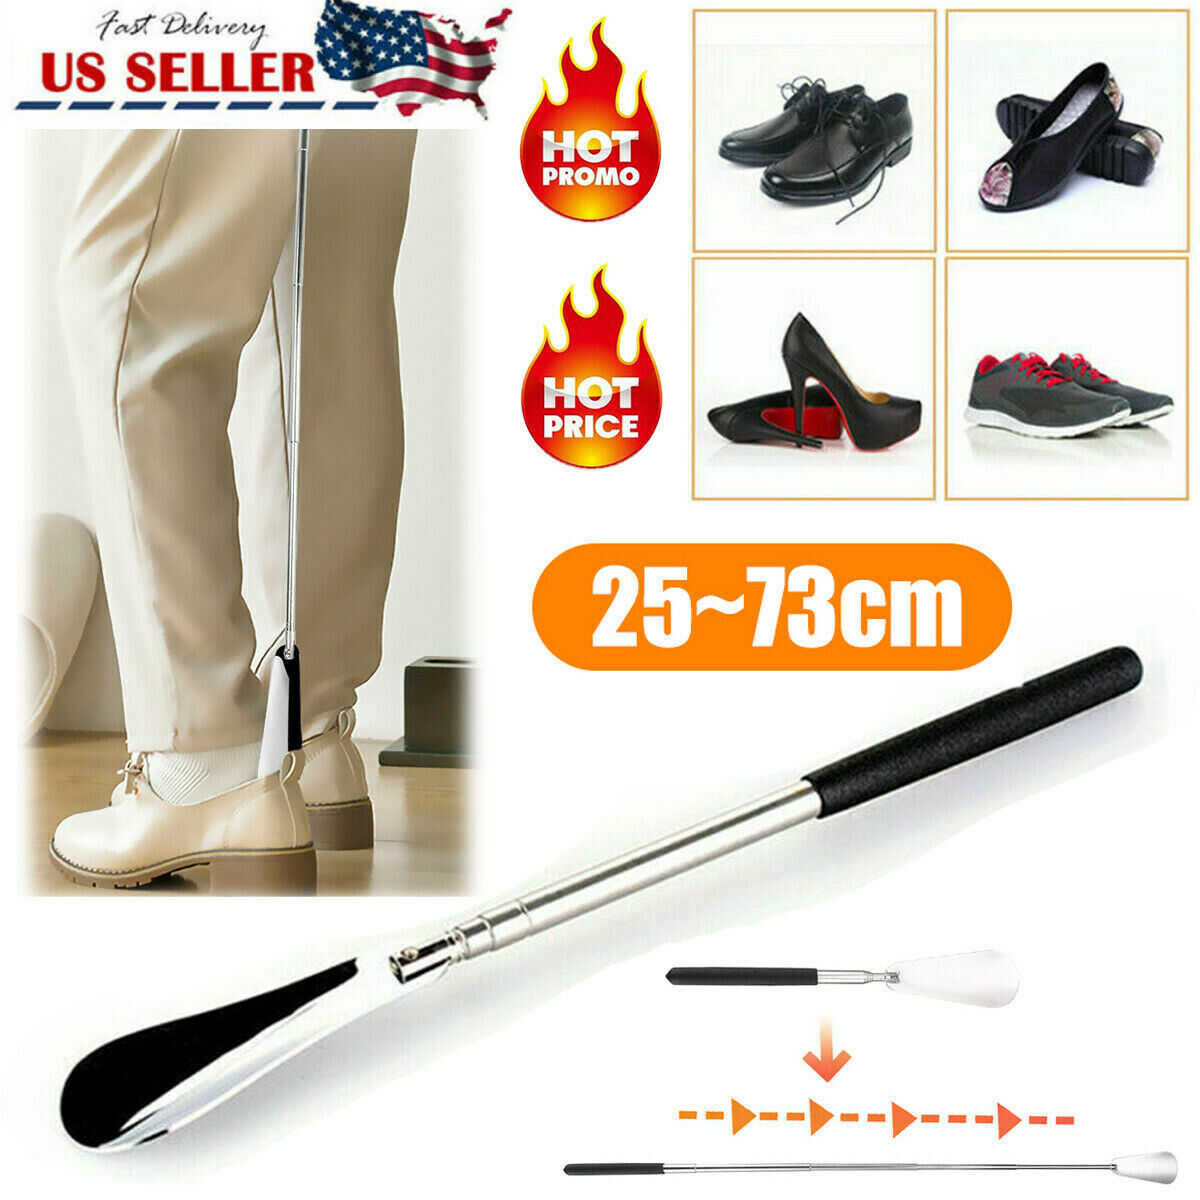 Extra Long Handle Shoe Horn Stainless Steel 25" Handled Metal Shoehorn Horns